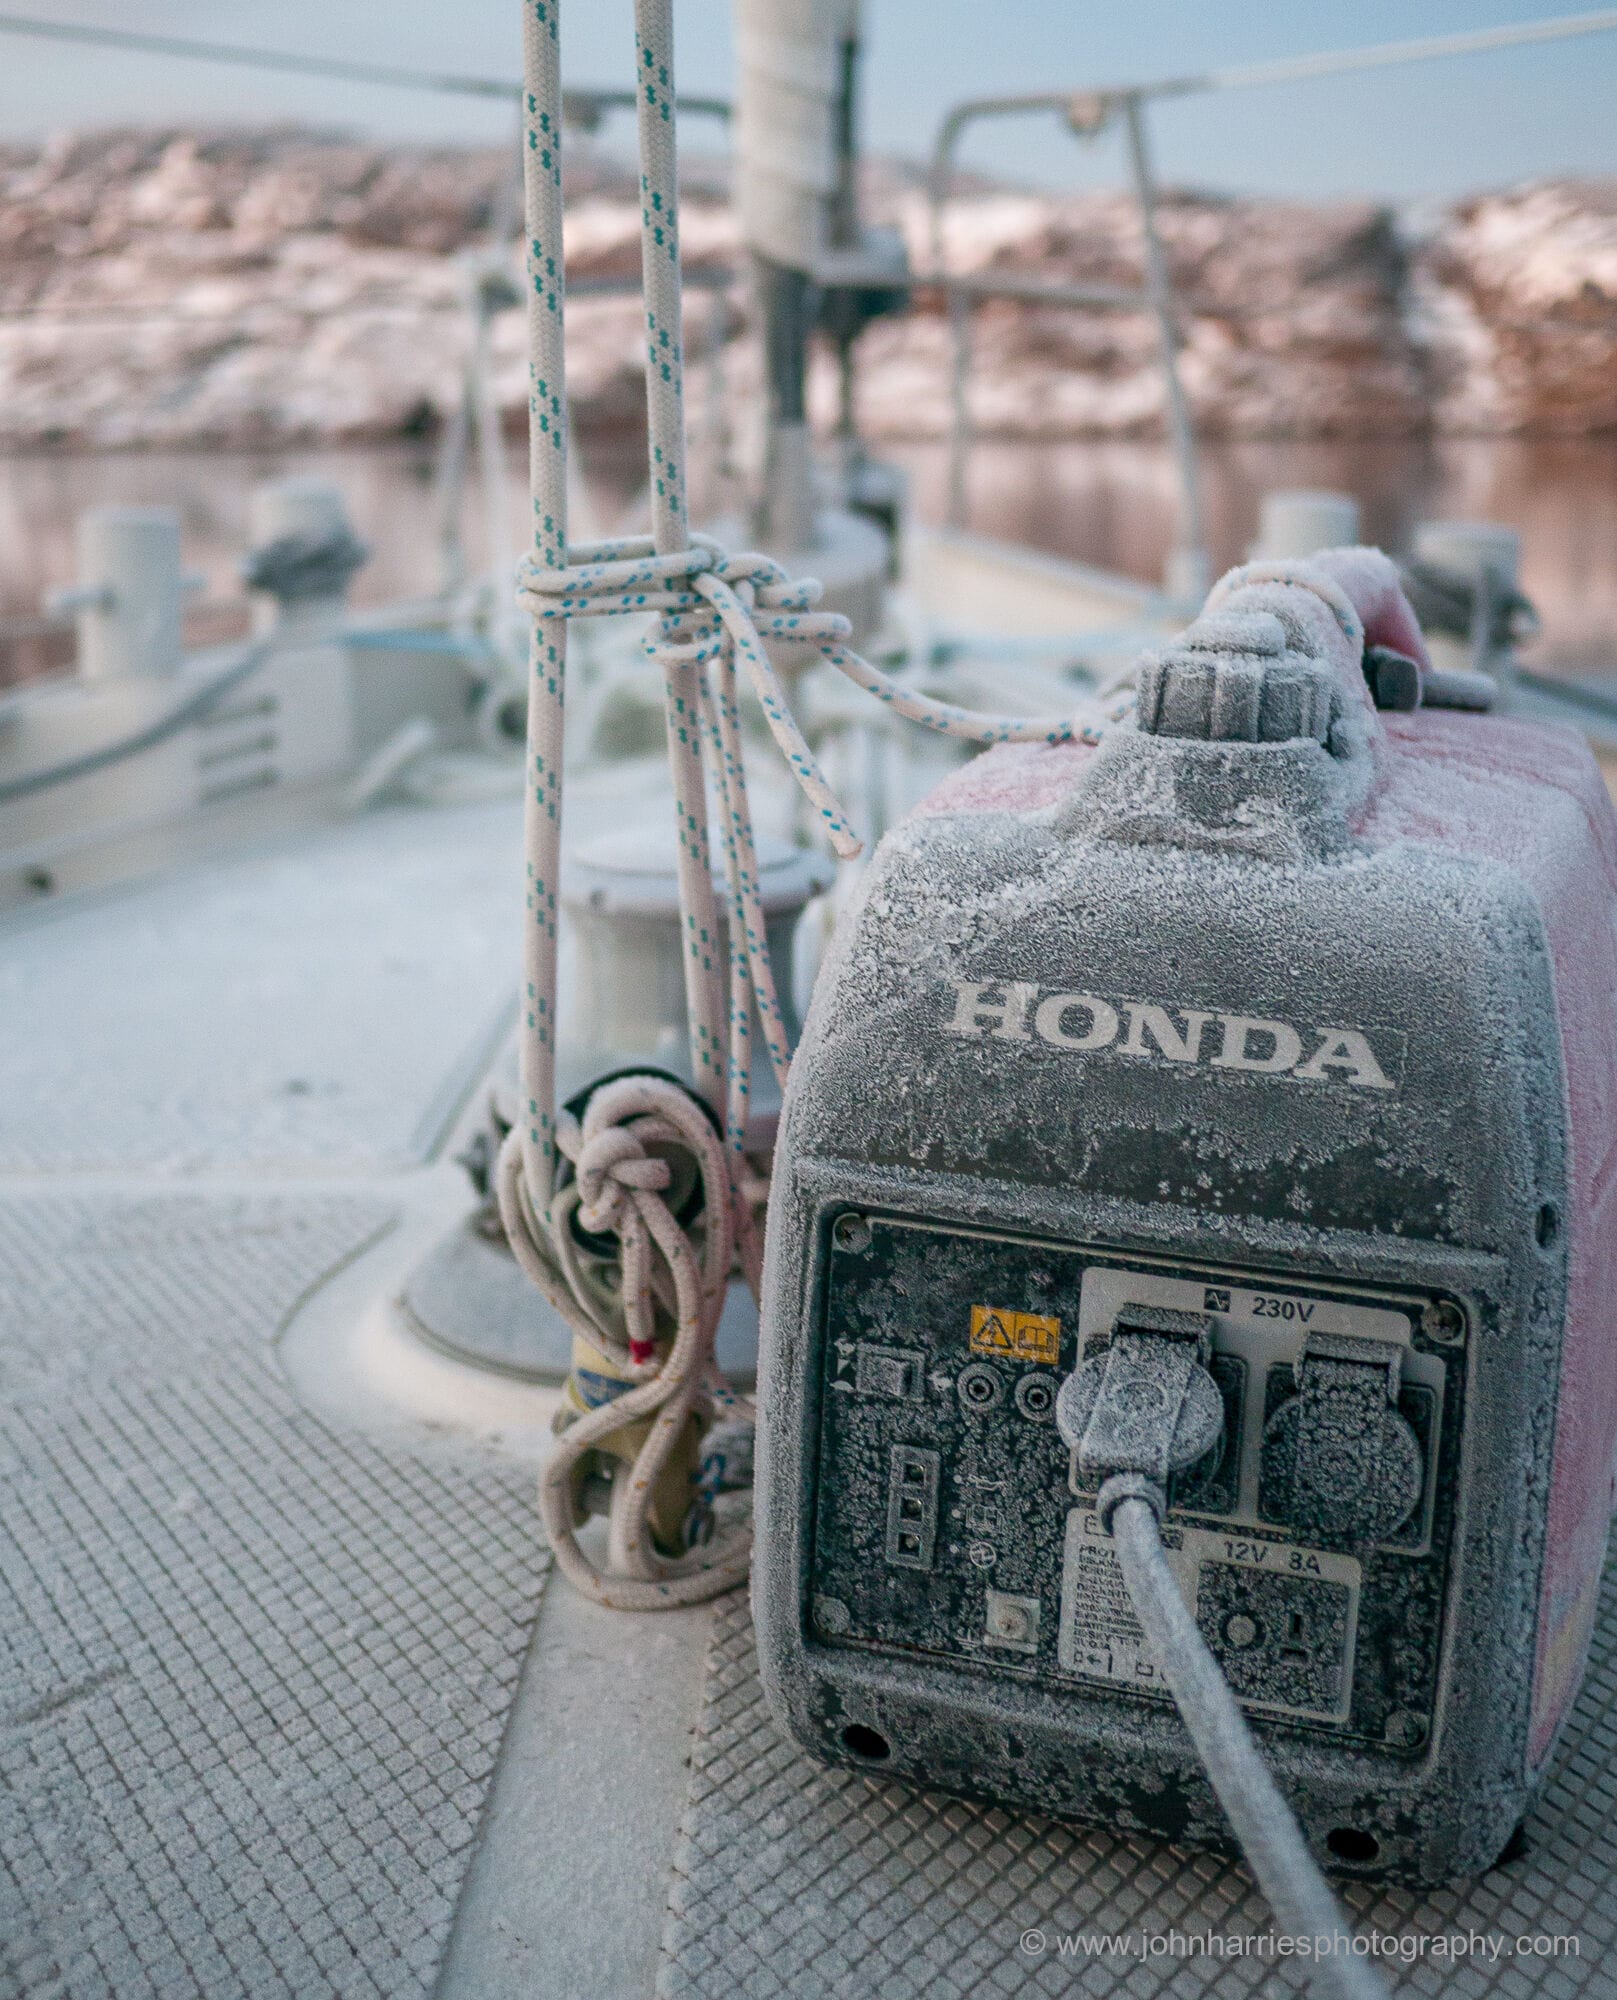 Why I Won't Power Our Boat With a Portable Generator